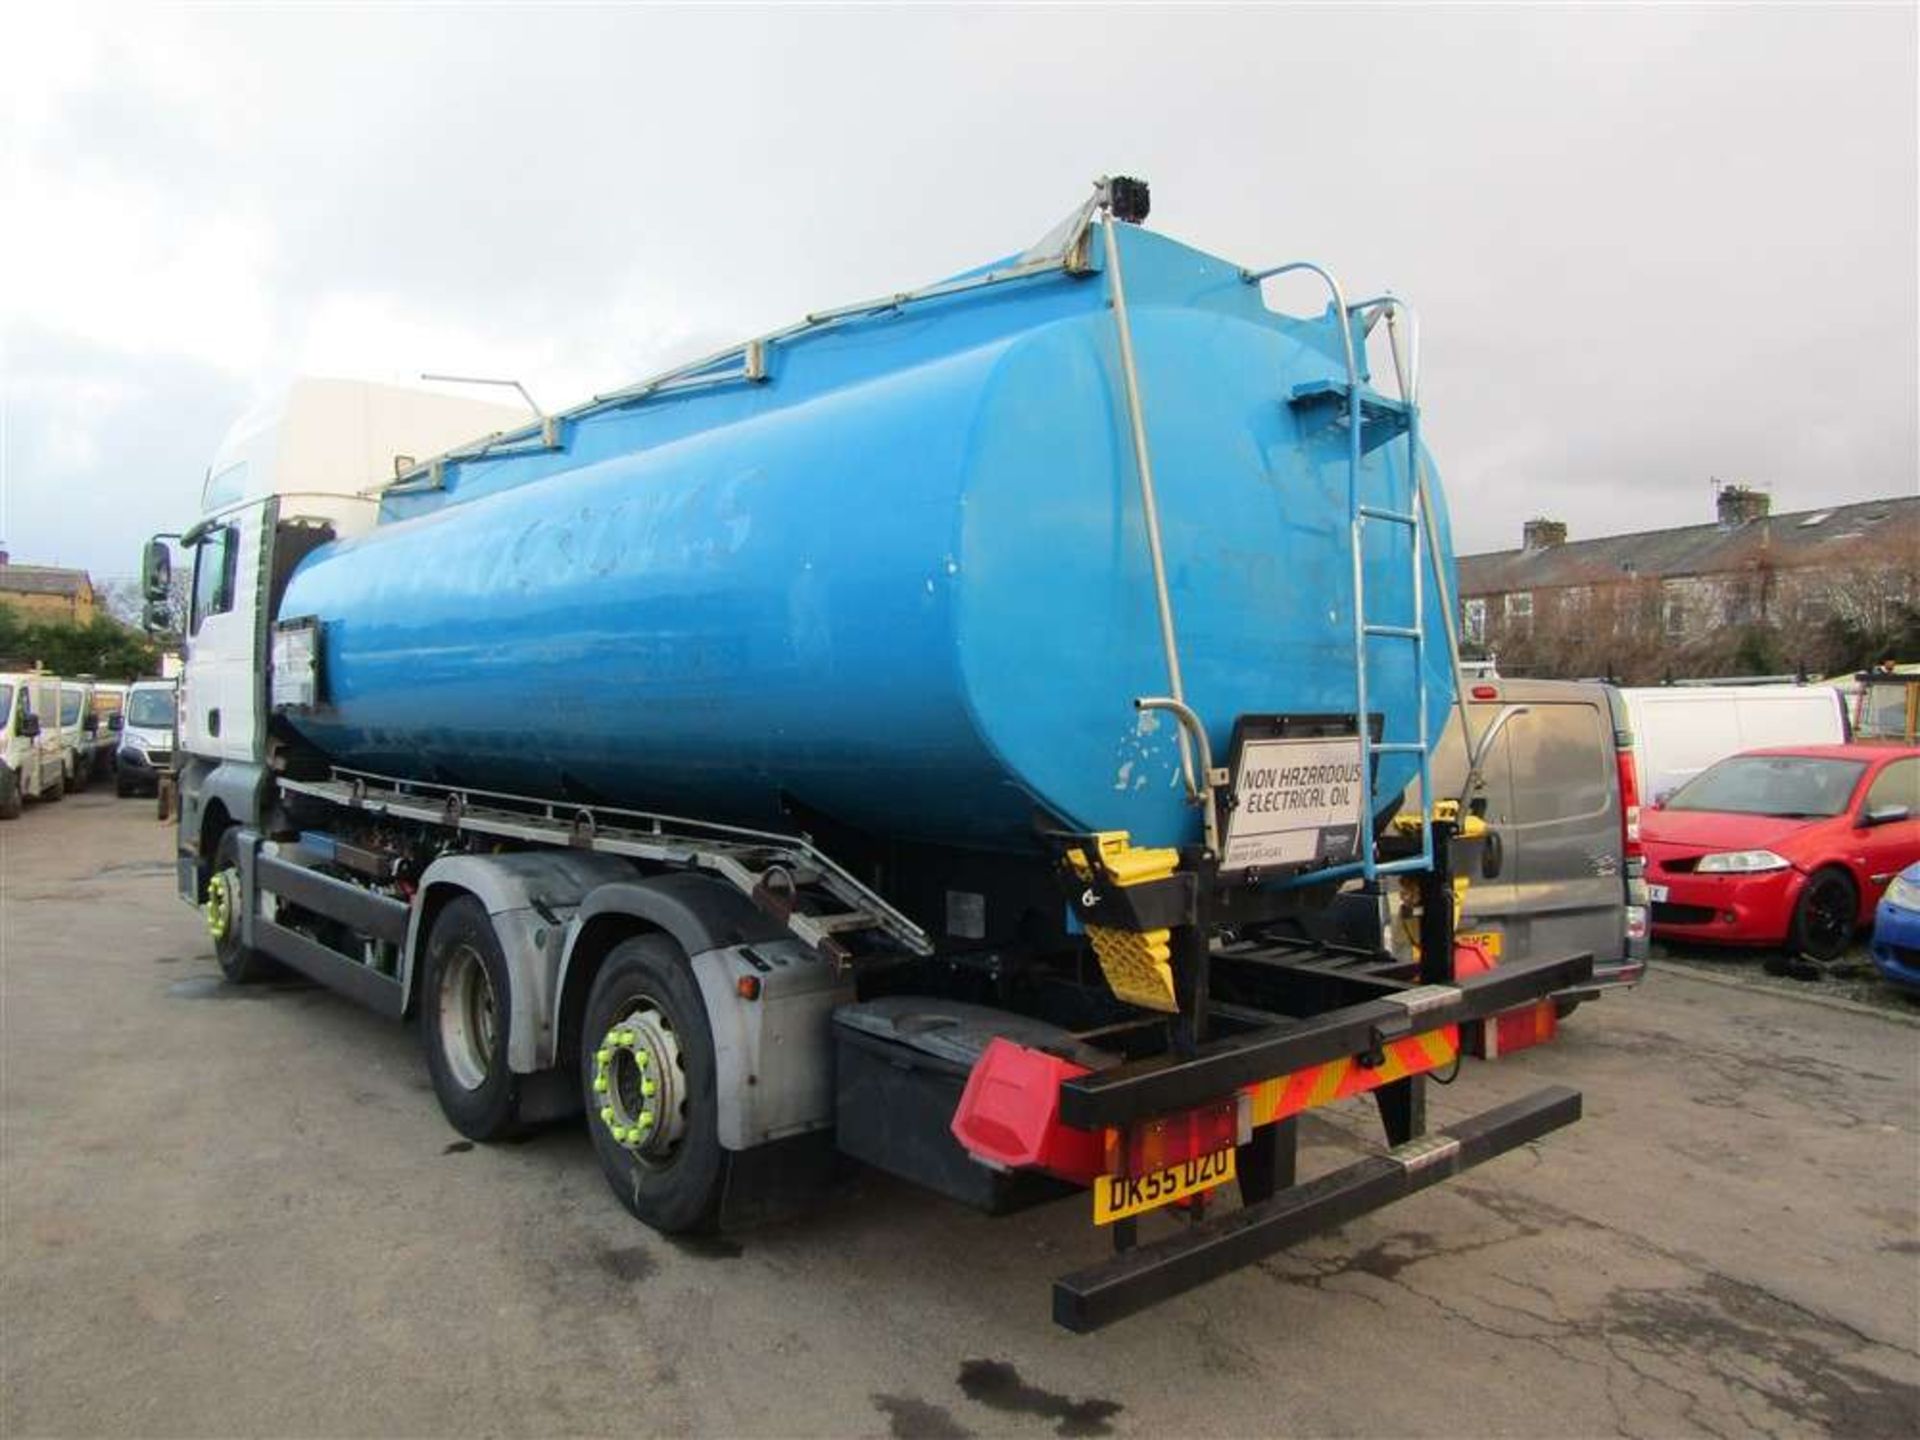 2005 55 reg MAN TG-A Oil Tanker (Direct Electricity North West) - Image 3 of 7